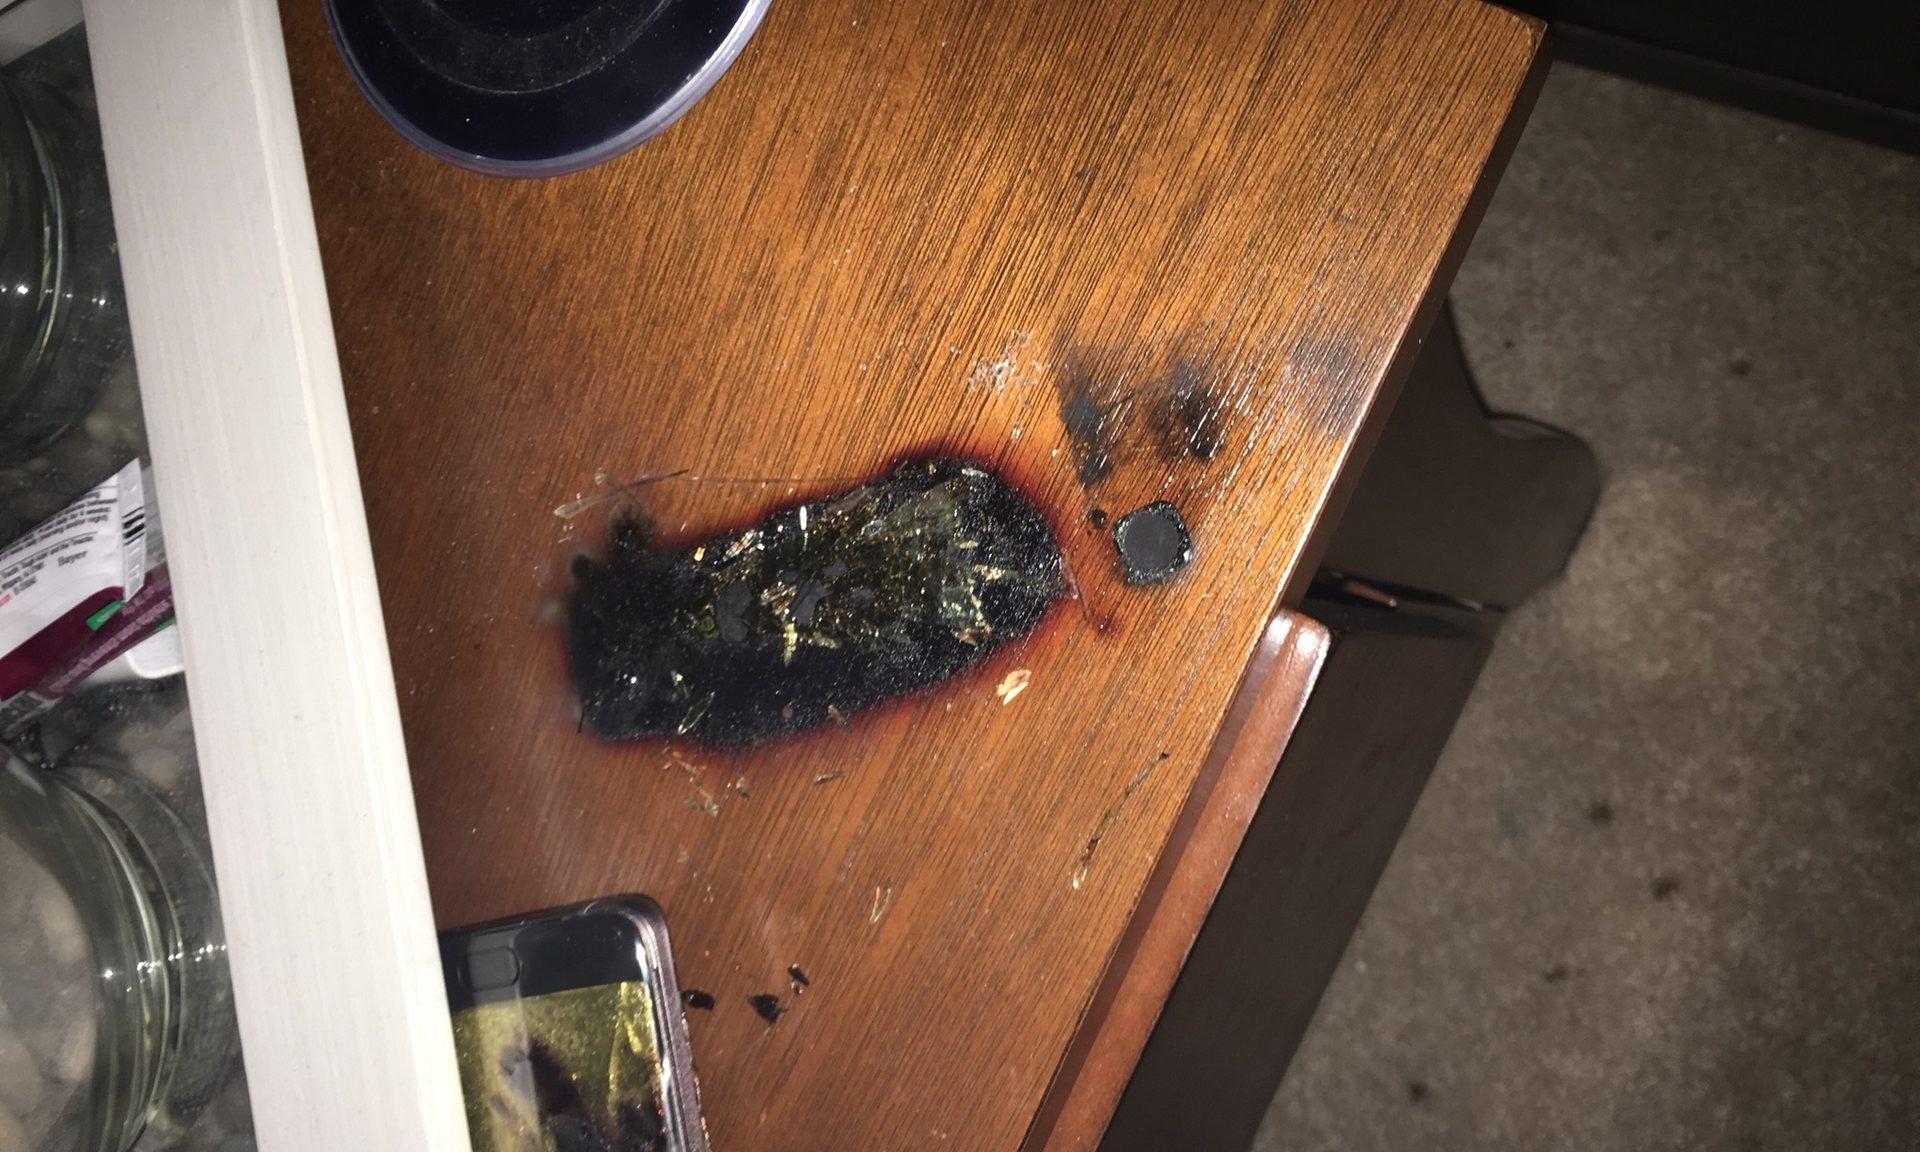 Shawn Minter's nightstand damaged by the explosion of his Galaxy Note 7 - Samsung won't pay for any damages caused by Galaxy Note 7 explosions